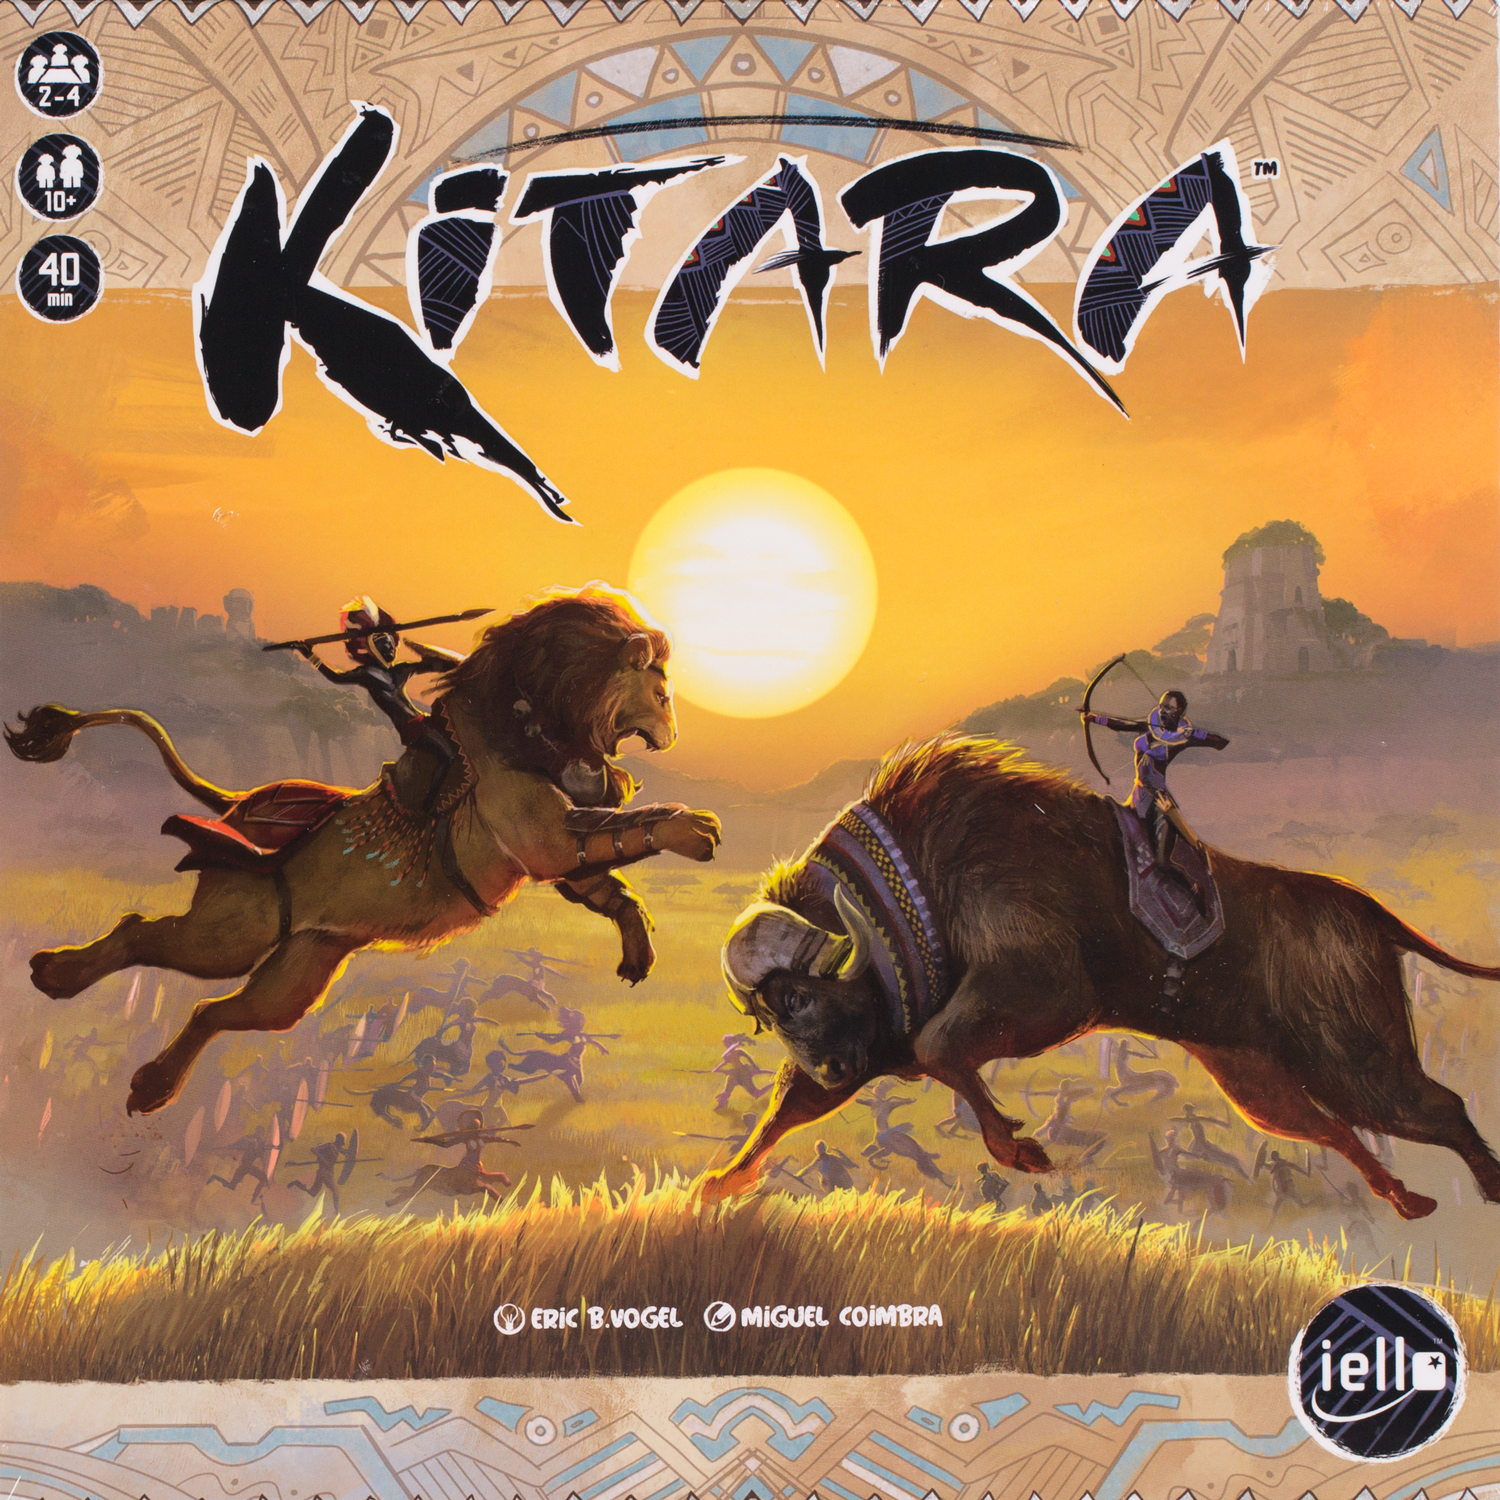 Kitara-01-buy-board-game-from-out-of-town-games